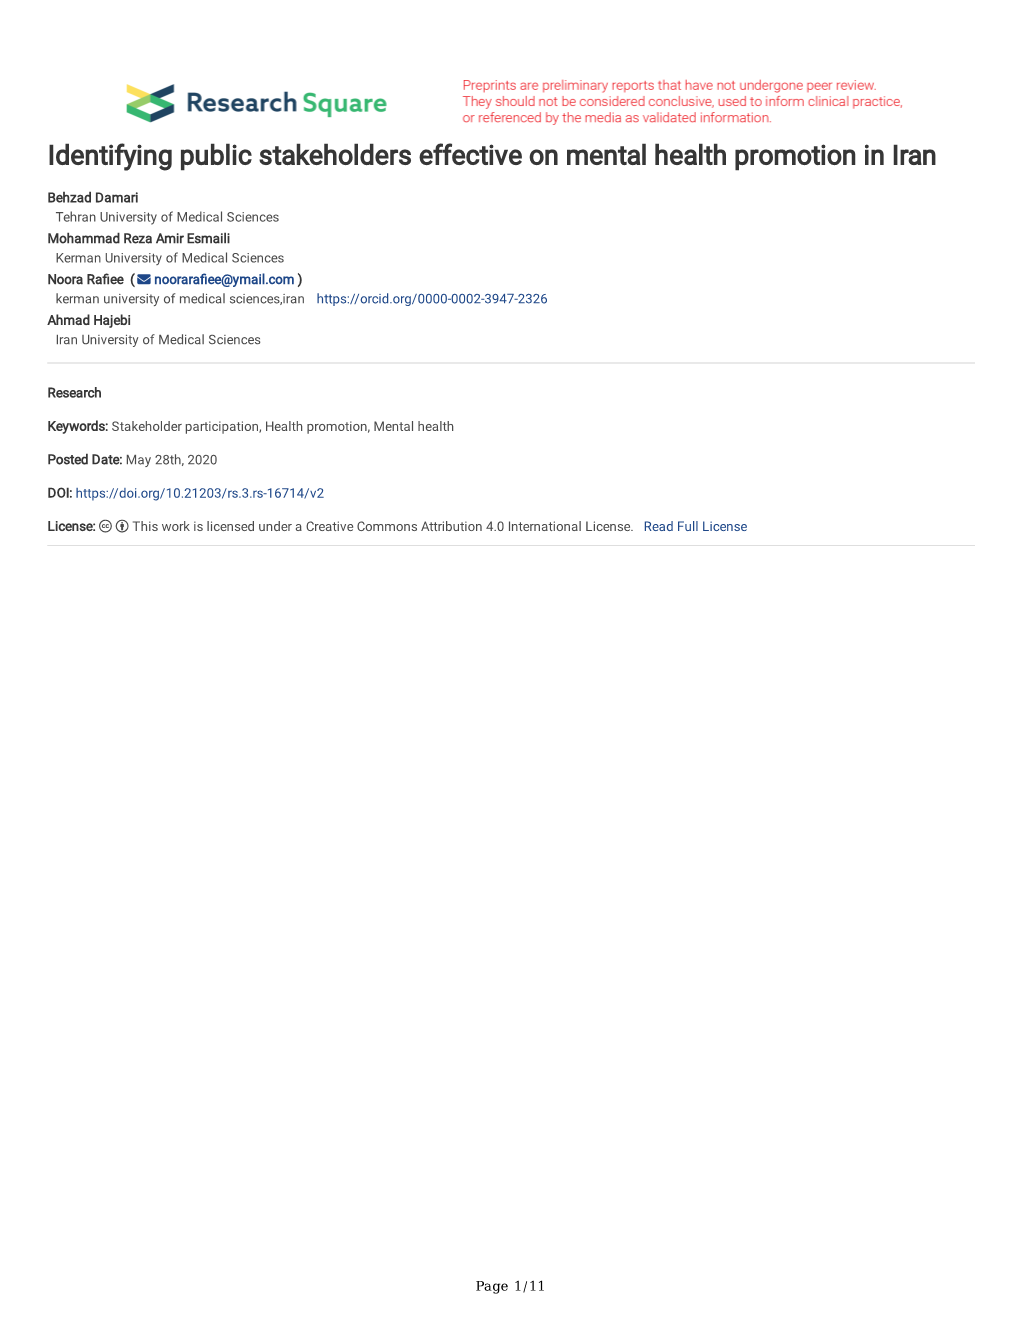 Identifying Public Stakeholders Effective on Mental Health Promotion in Iran